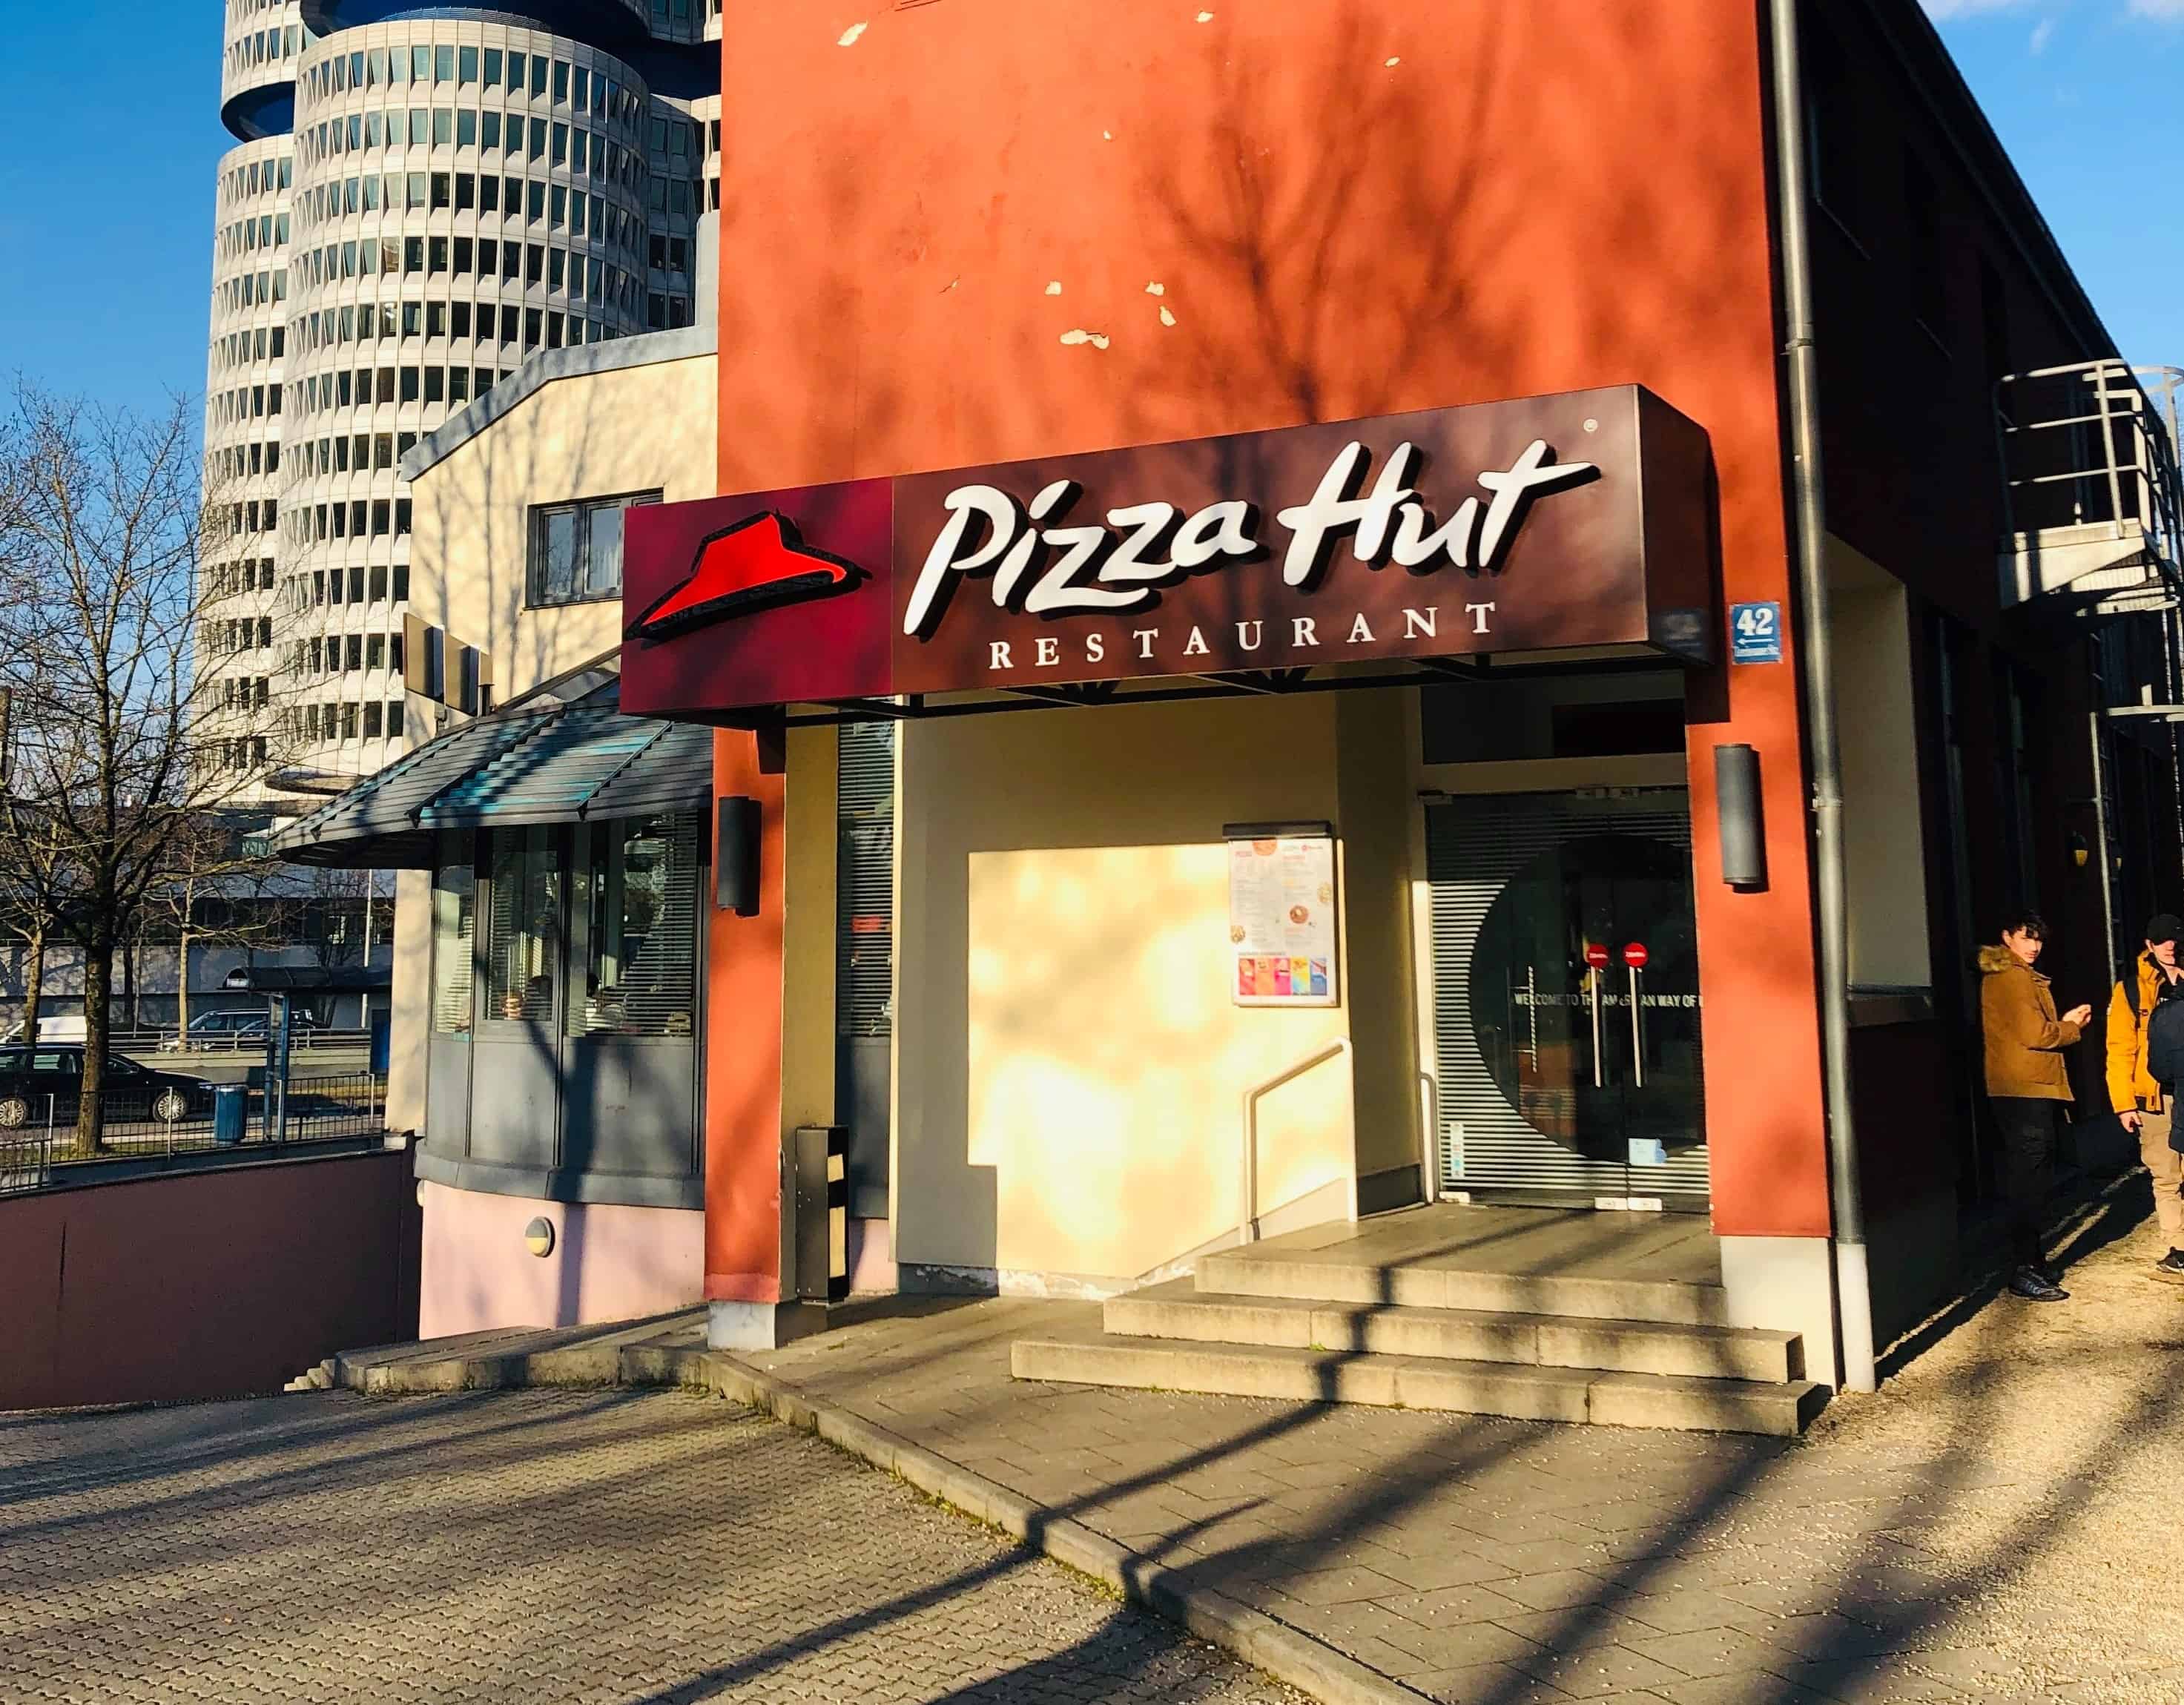 Why I Celebrated 10 Years of Pizza Touring with a Pizza Hut